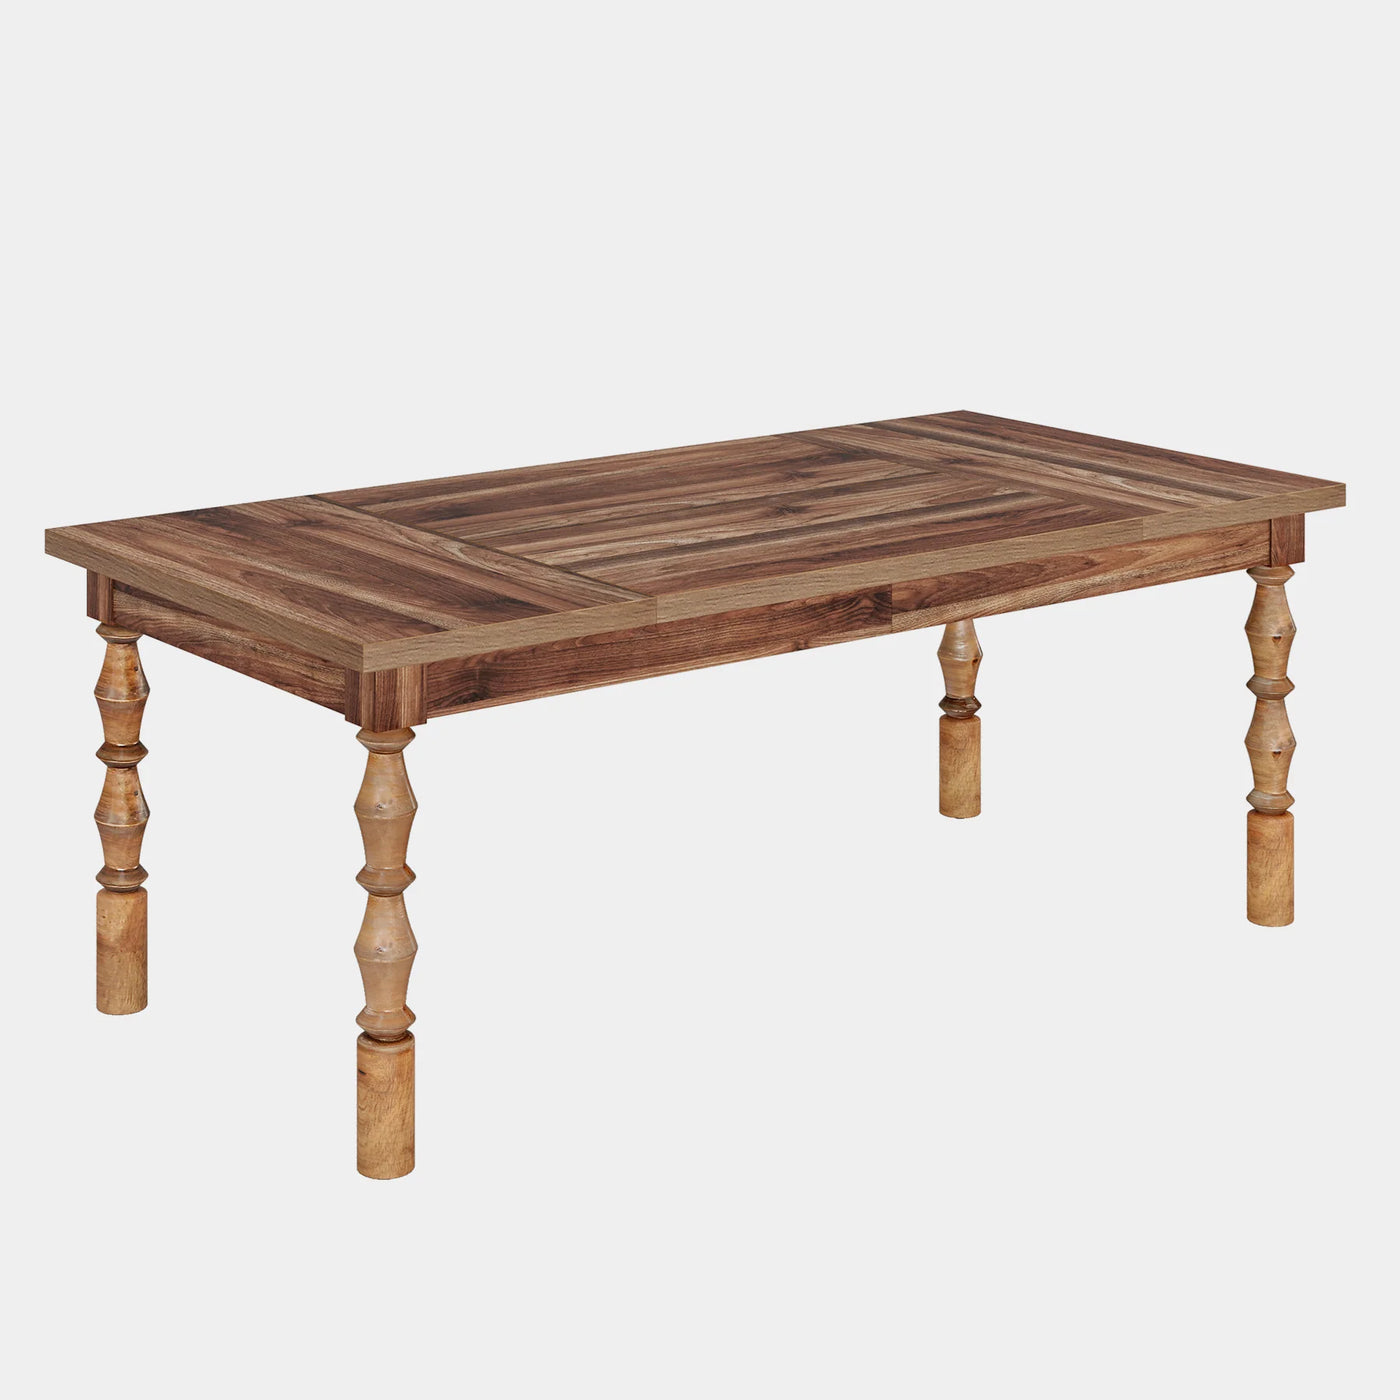 Winster Wood Dining Table | 62” Kitchen Table with Carved Turned Legs for 4-6 People